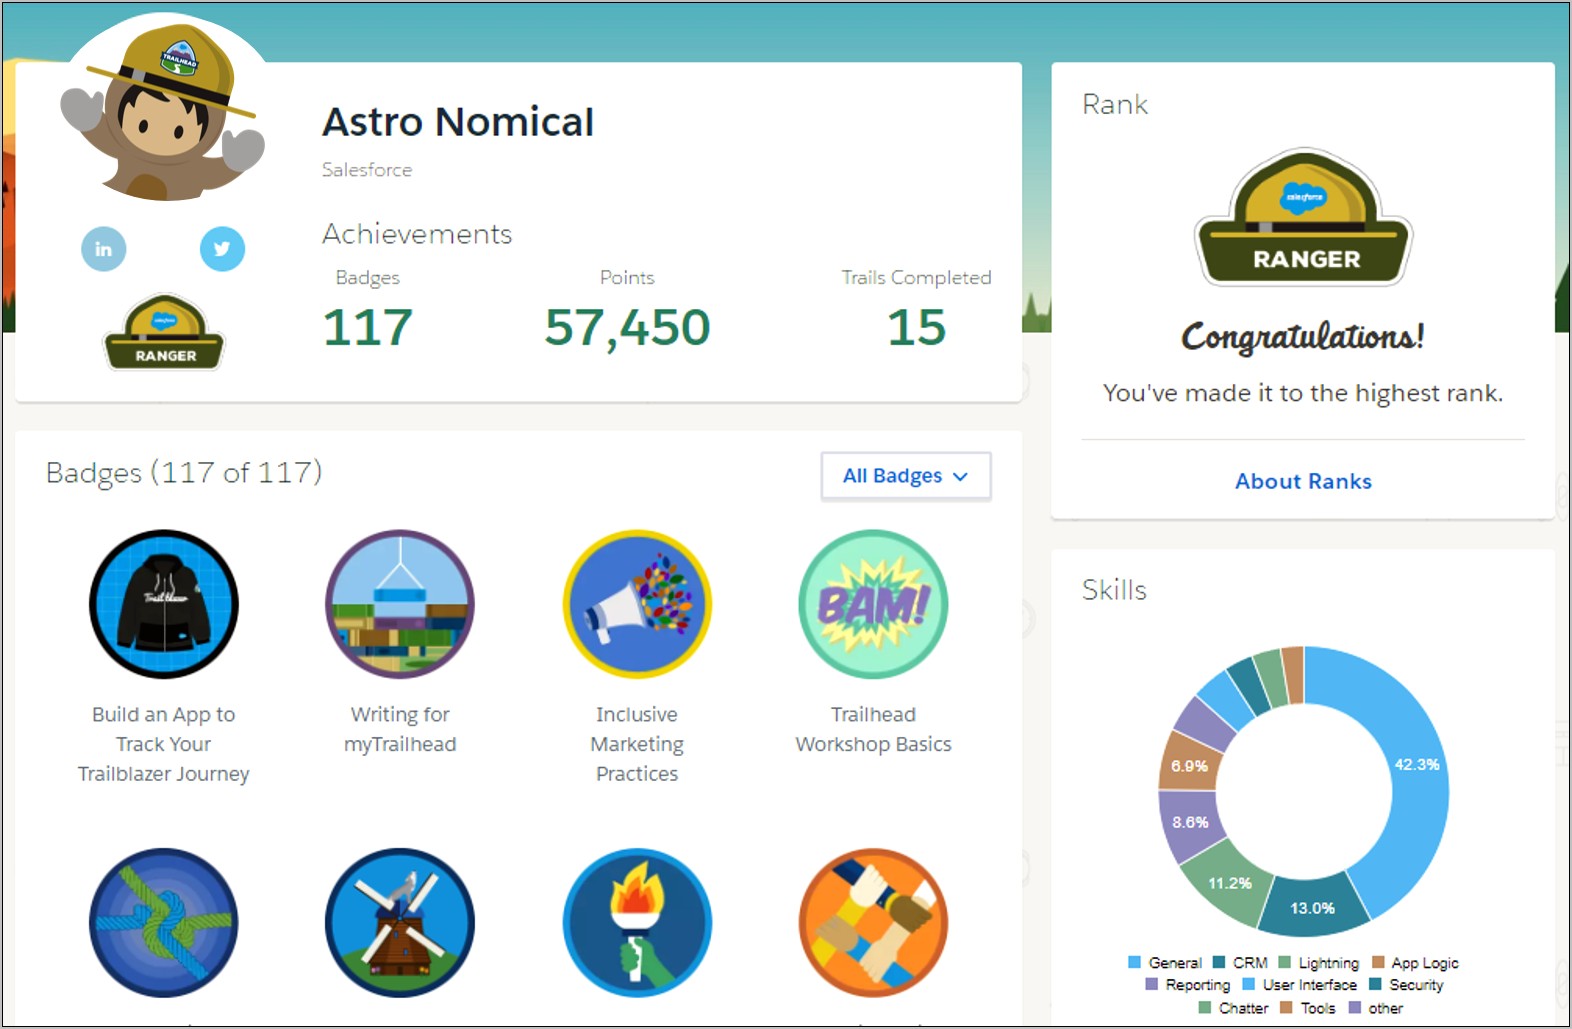 Can We Use Trailhead Experience On Resume